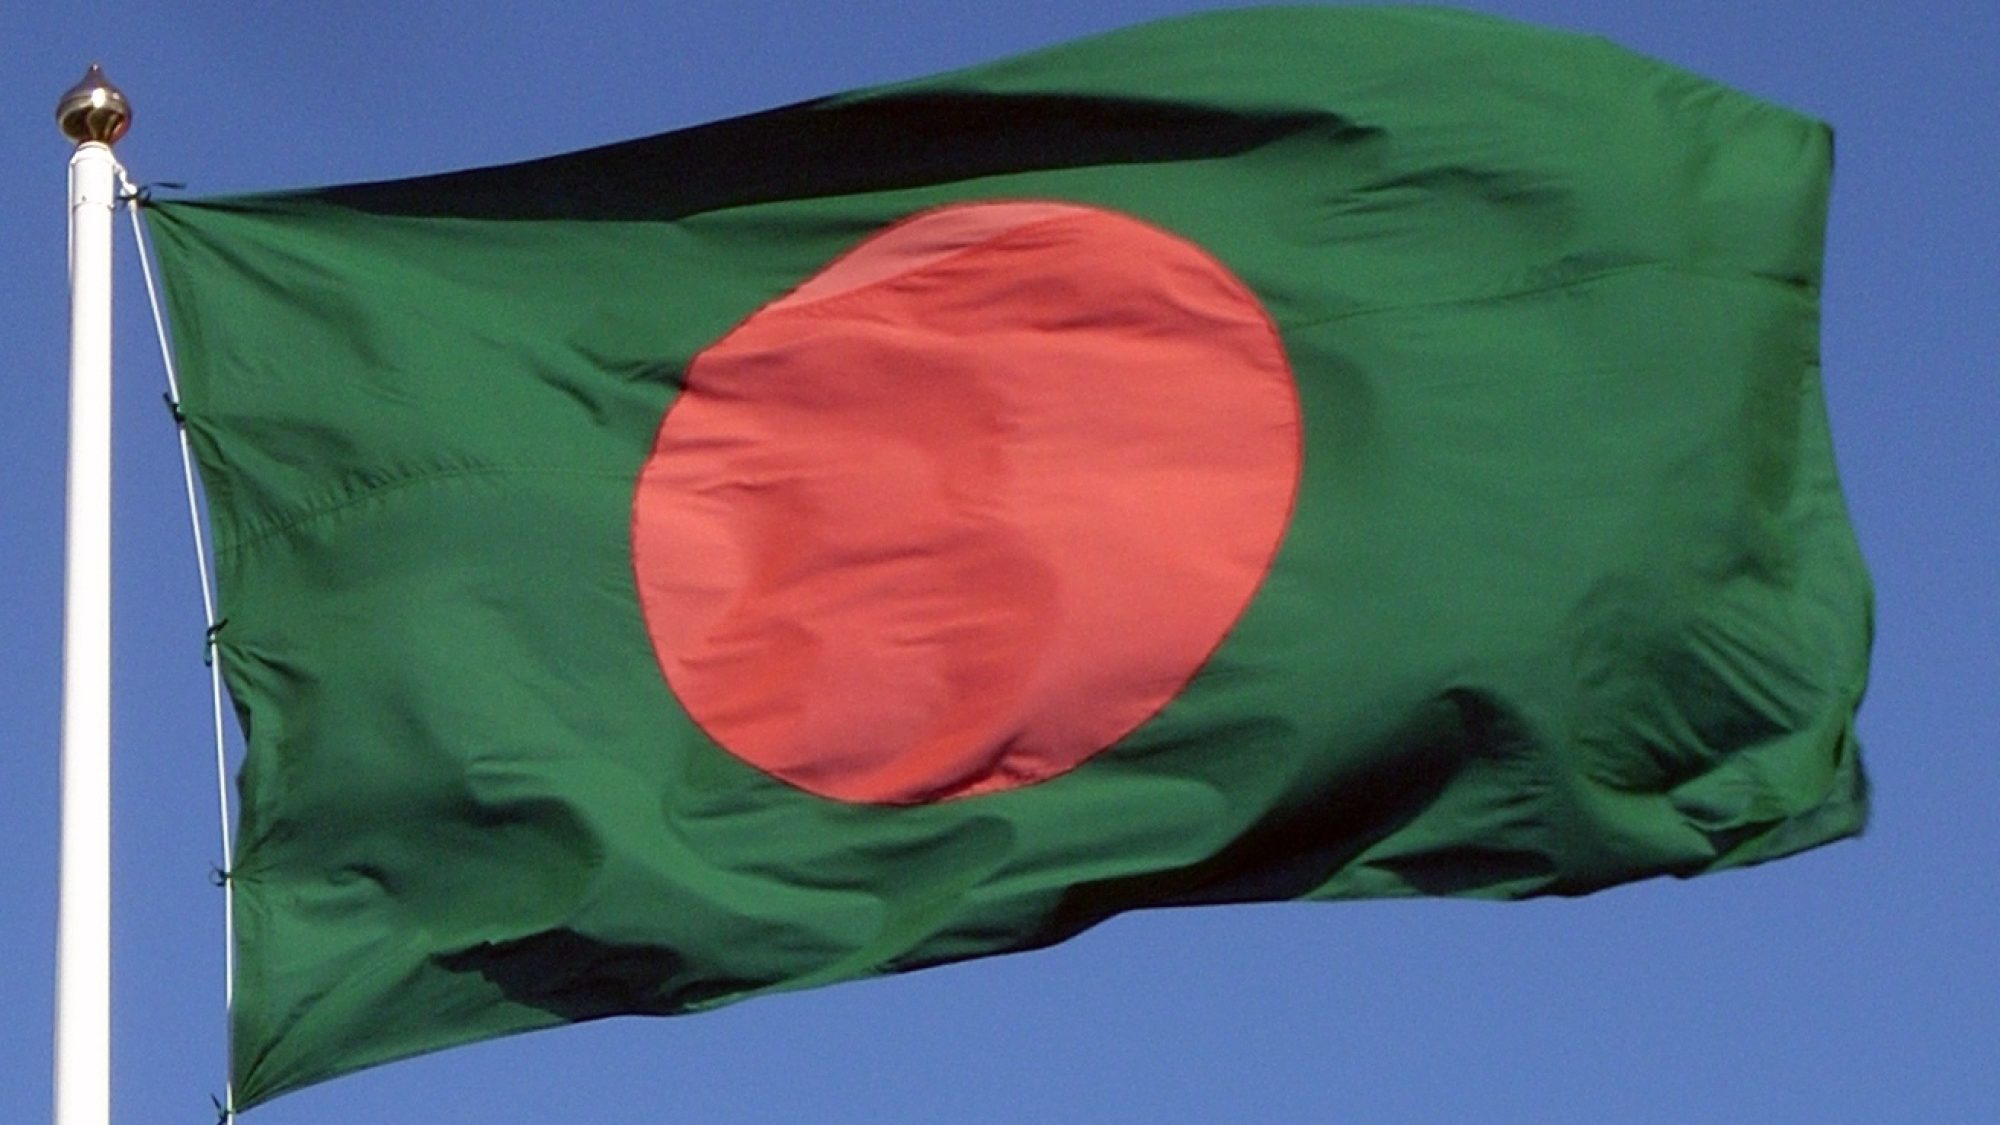 The flag of Bangladesh flying in front of a blue sky